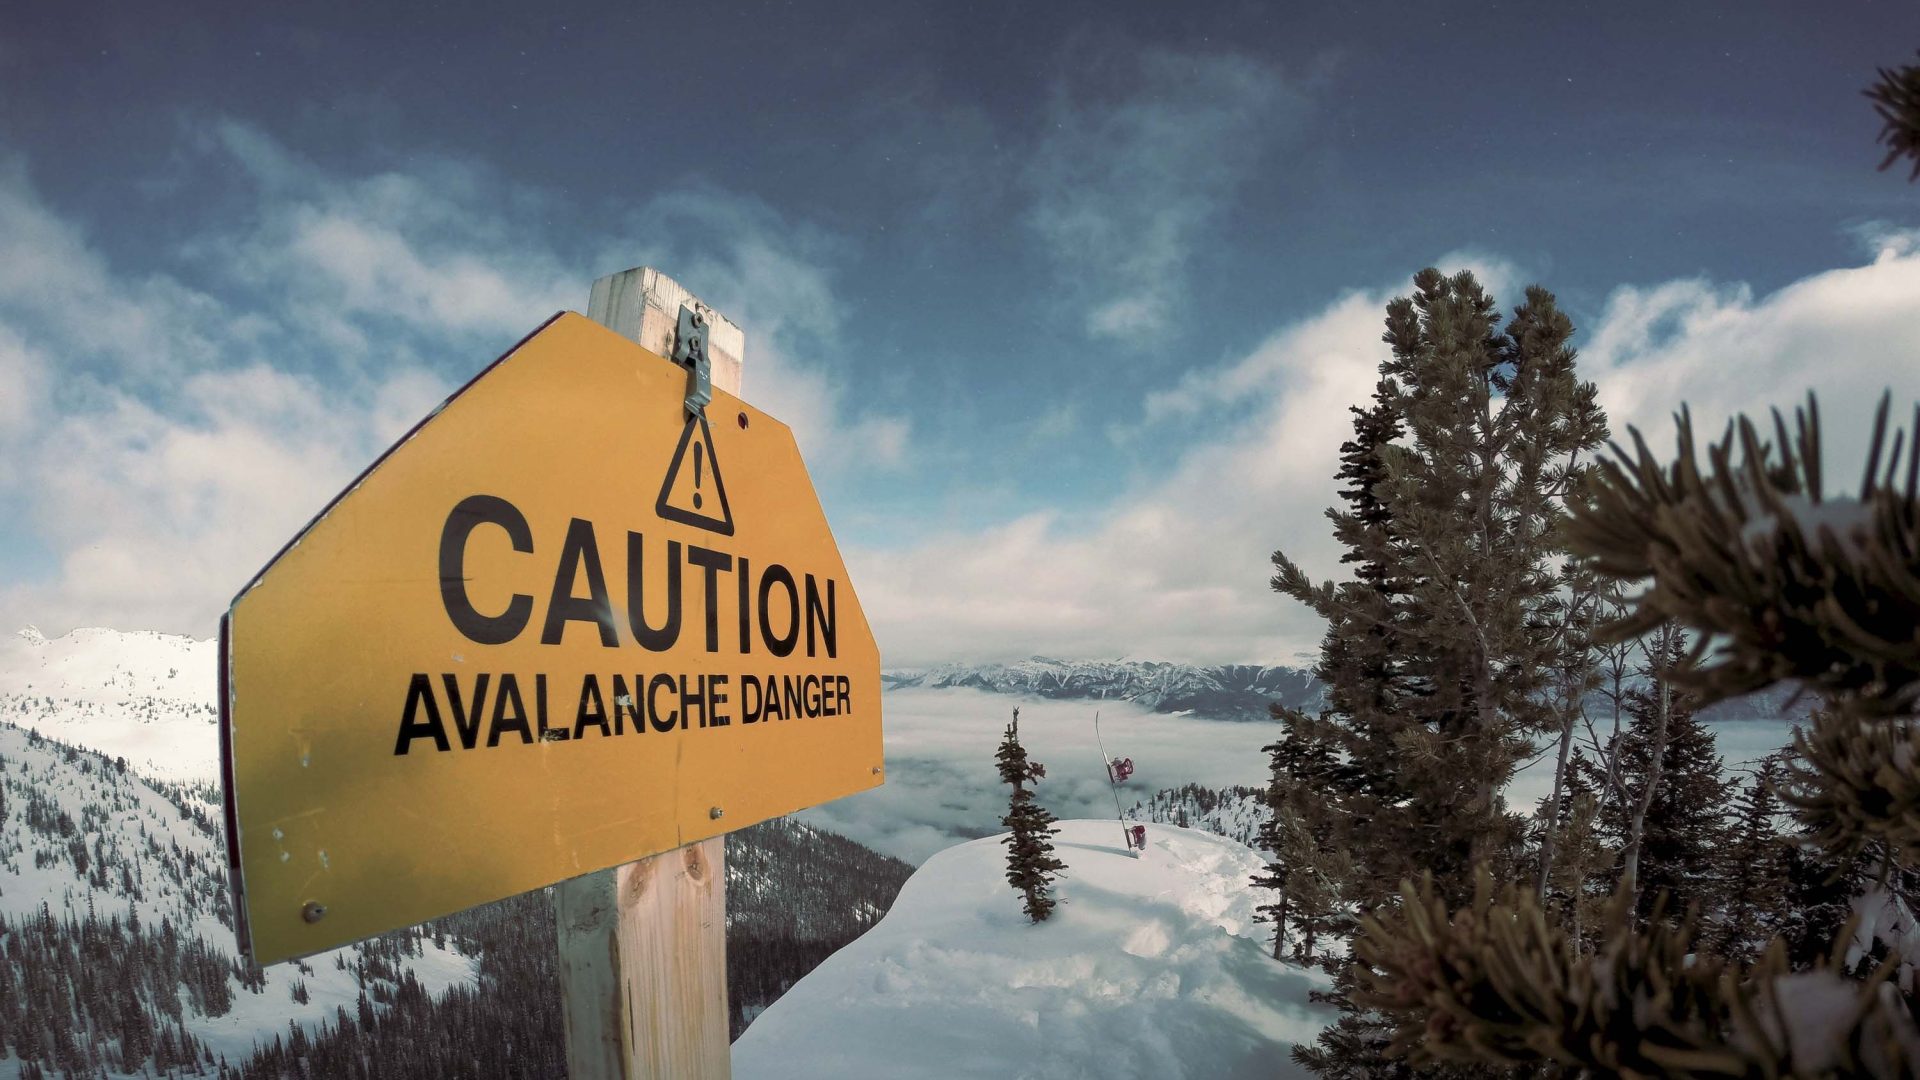 A sign warning of avalanche on a snowy mountain.